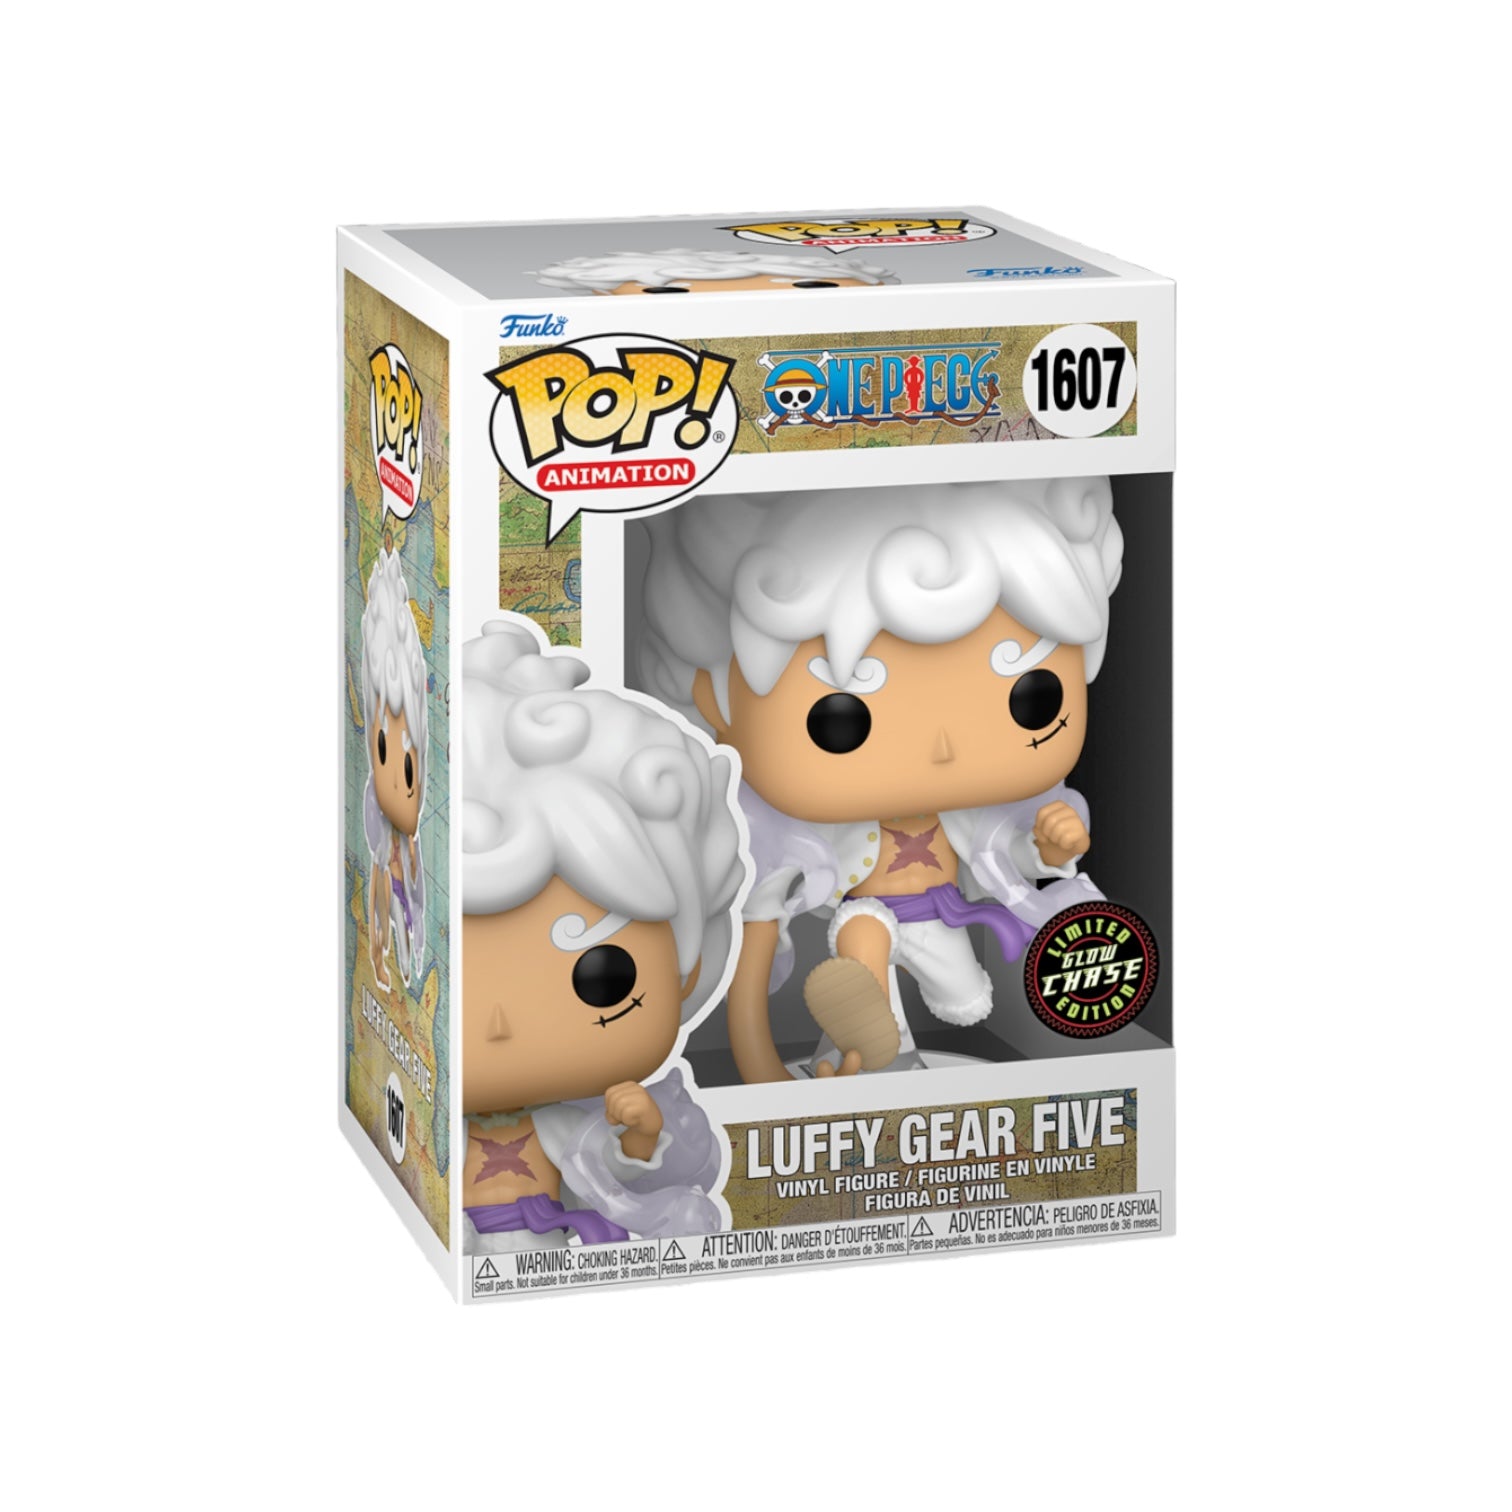 Luffy Gear Five #1607 (Chance of Glow Chase) Funko Pop! One Piece - PREORDER